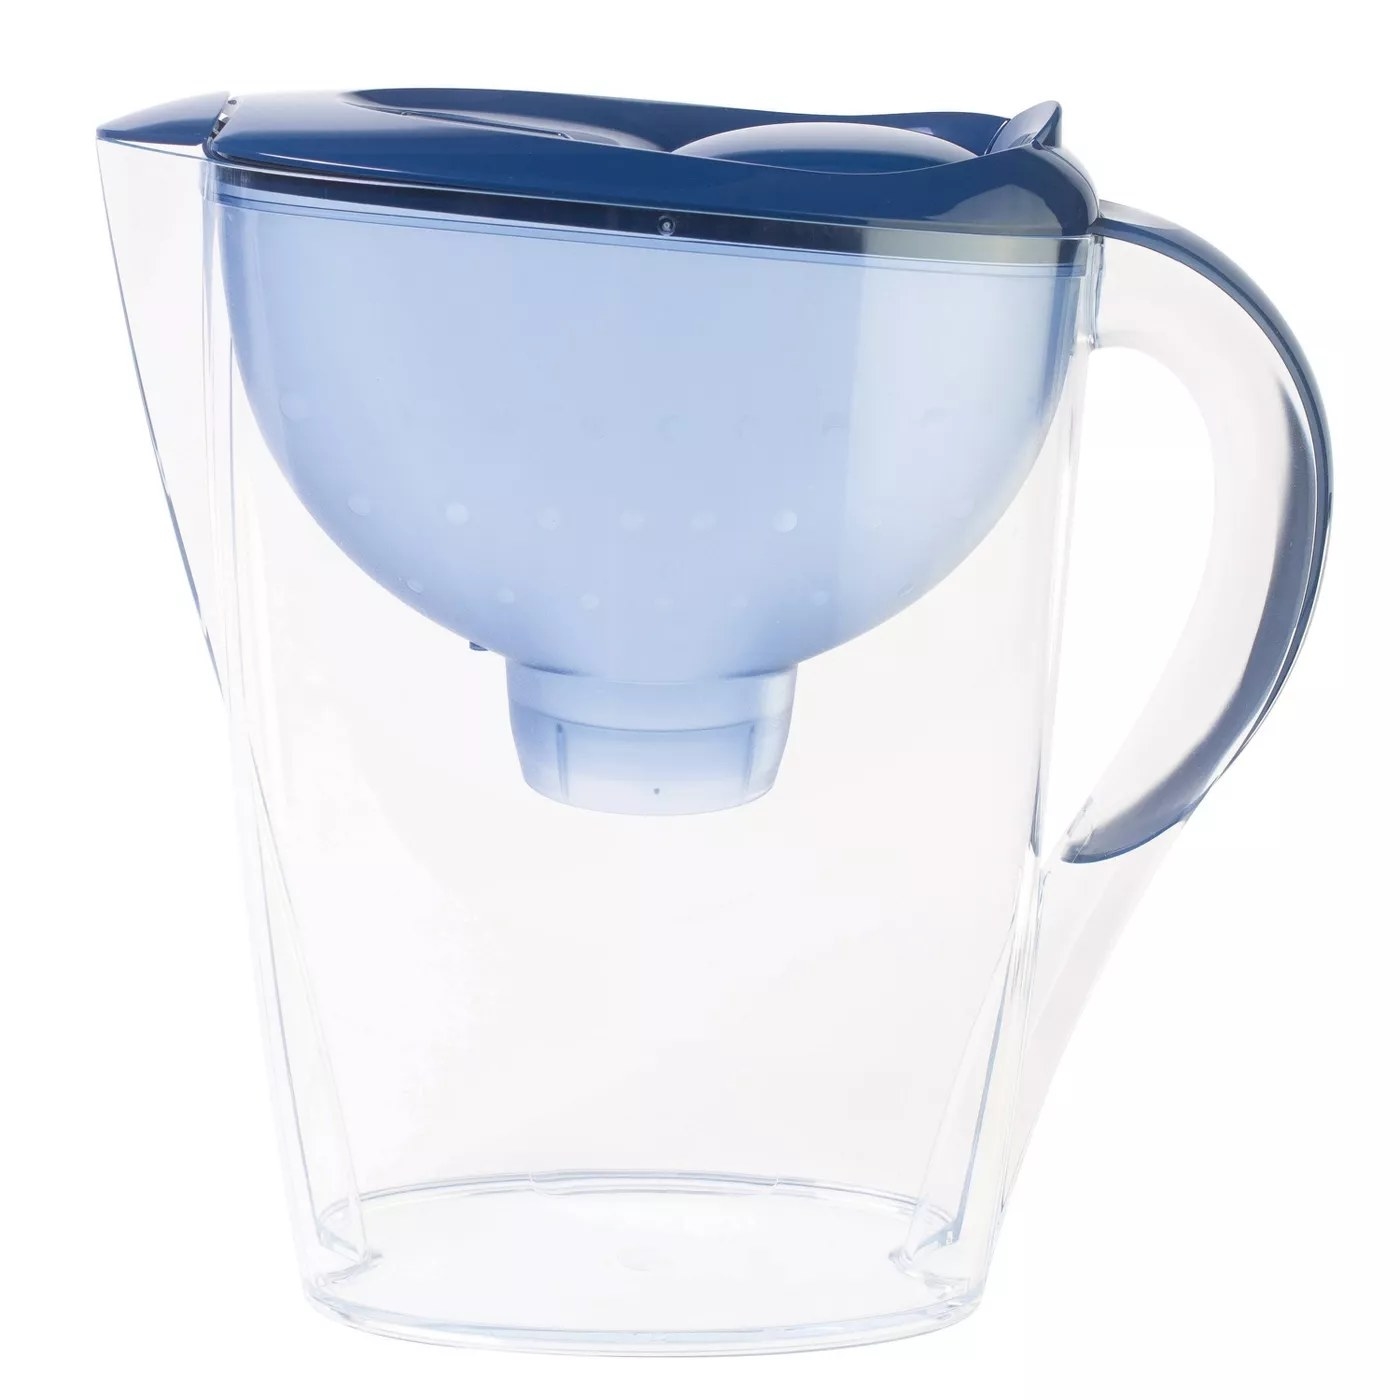 The blue filtration pitcher